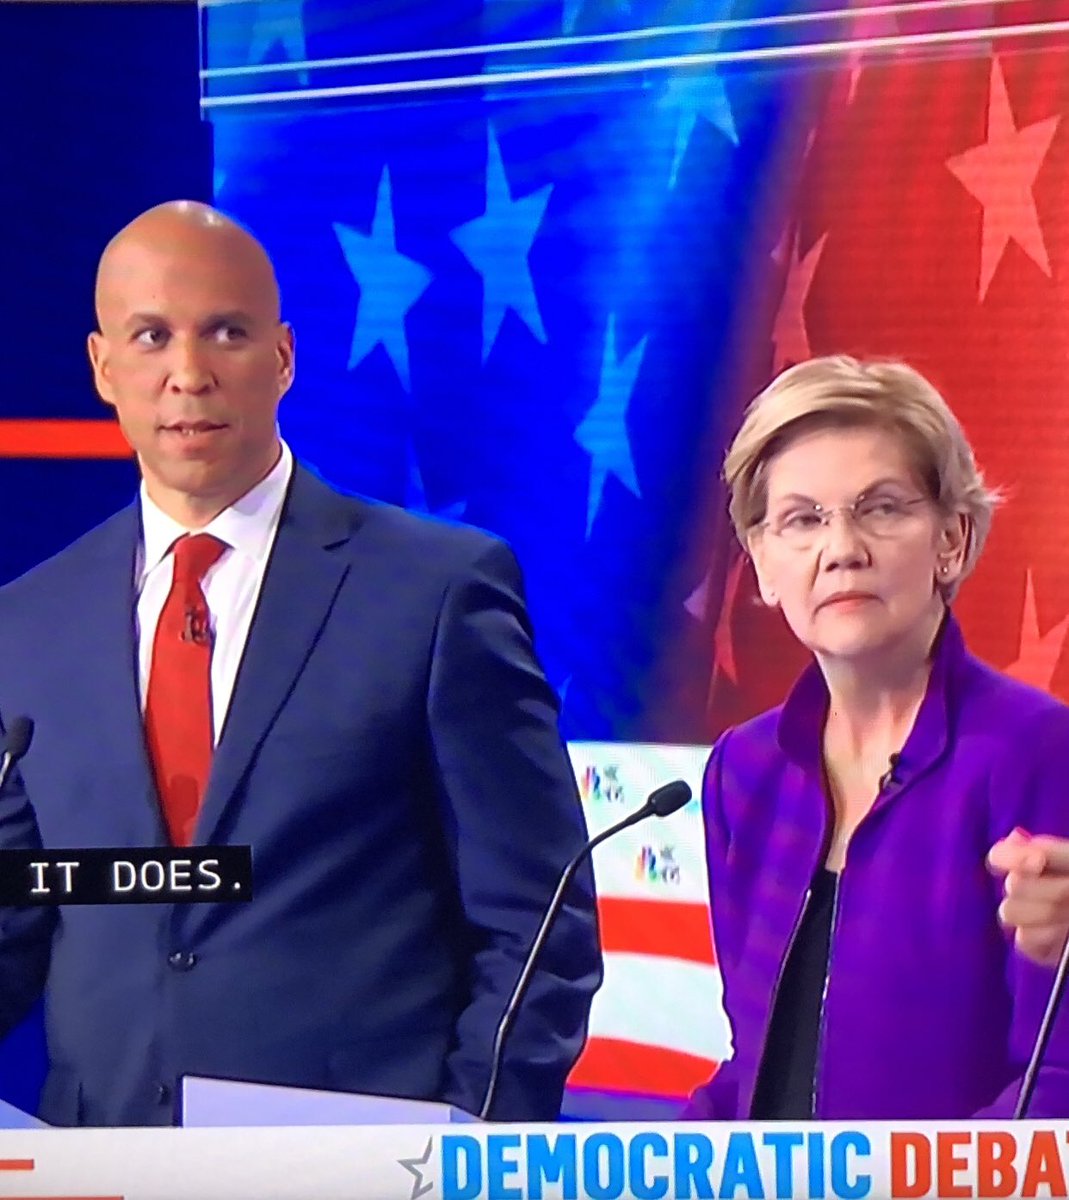 RT @andizeisler: omg Booker’s face when Beto busted out the Spanish https://t.co/O4oY4HowWK